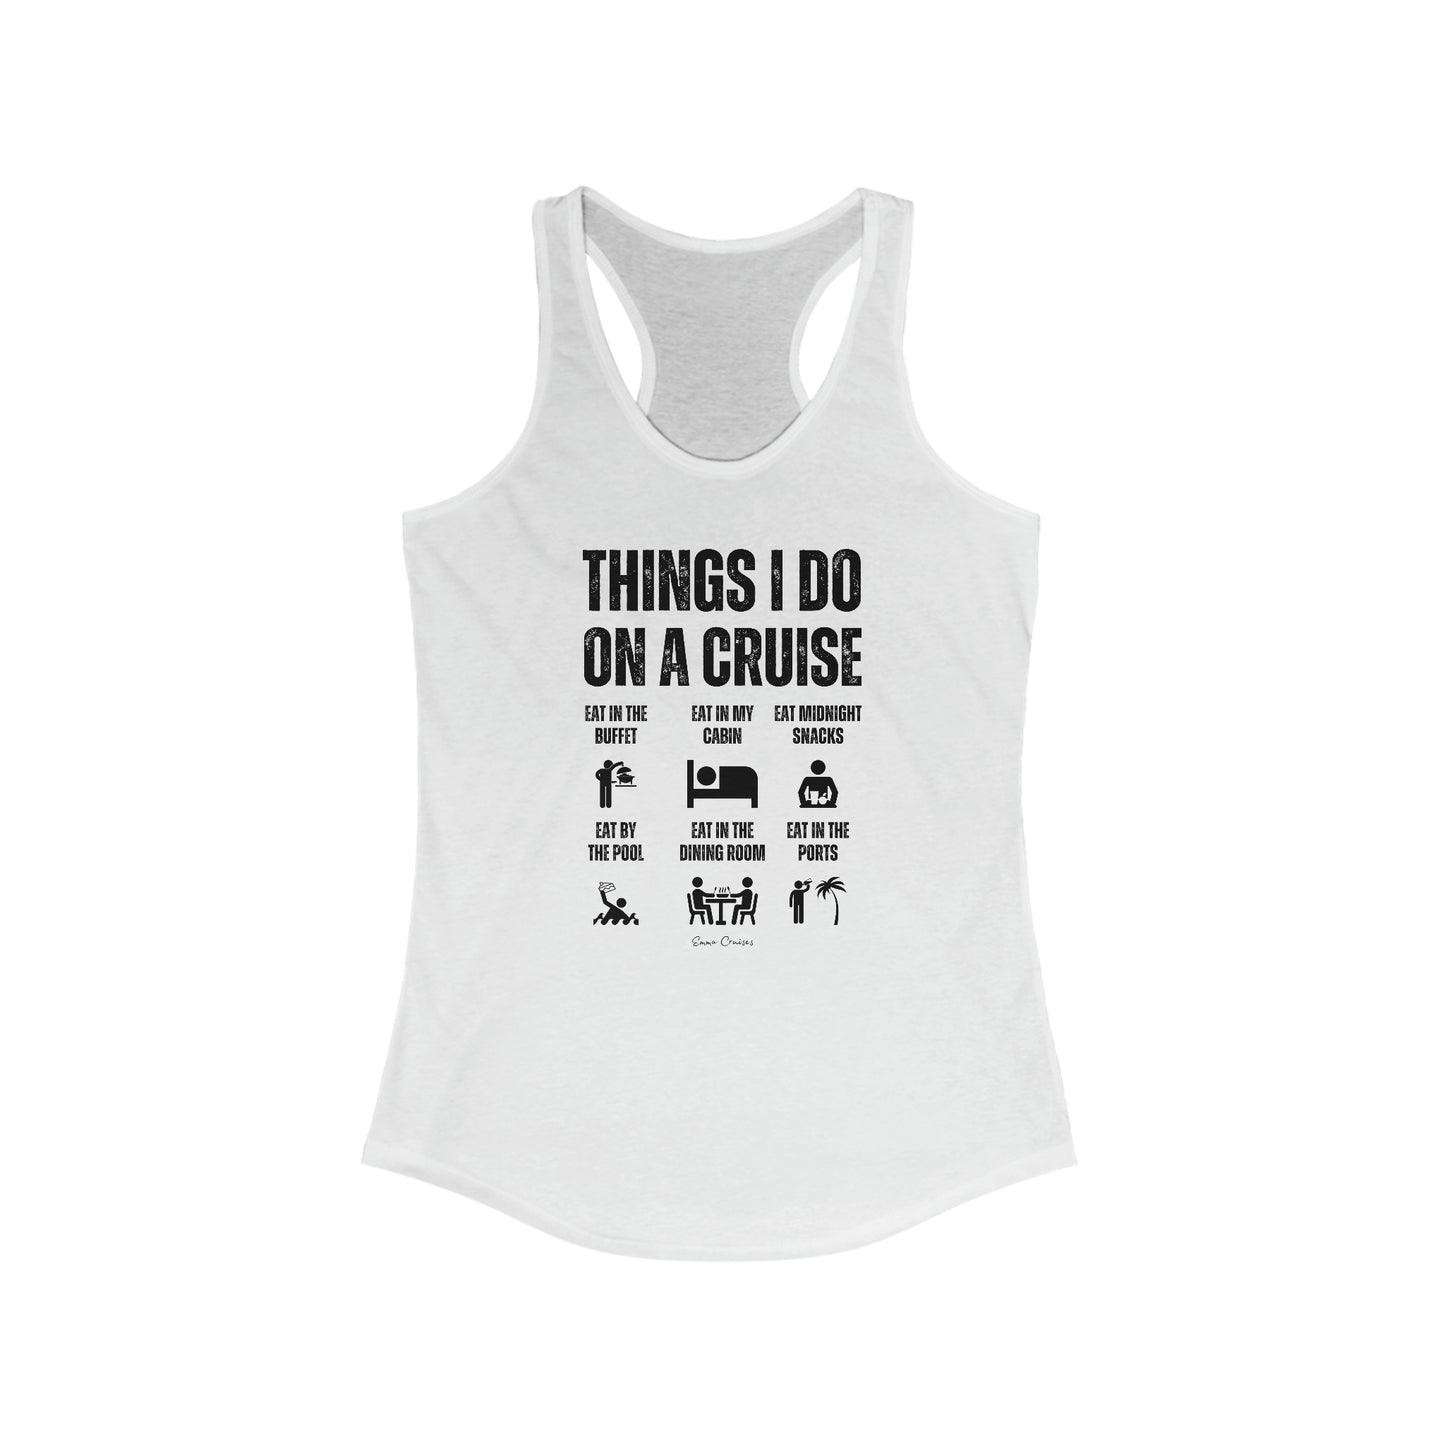 Things I Do on a Cruise - Tank Top